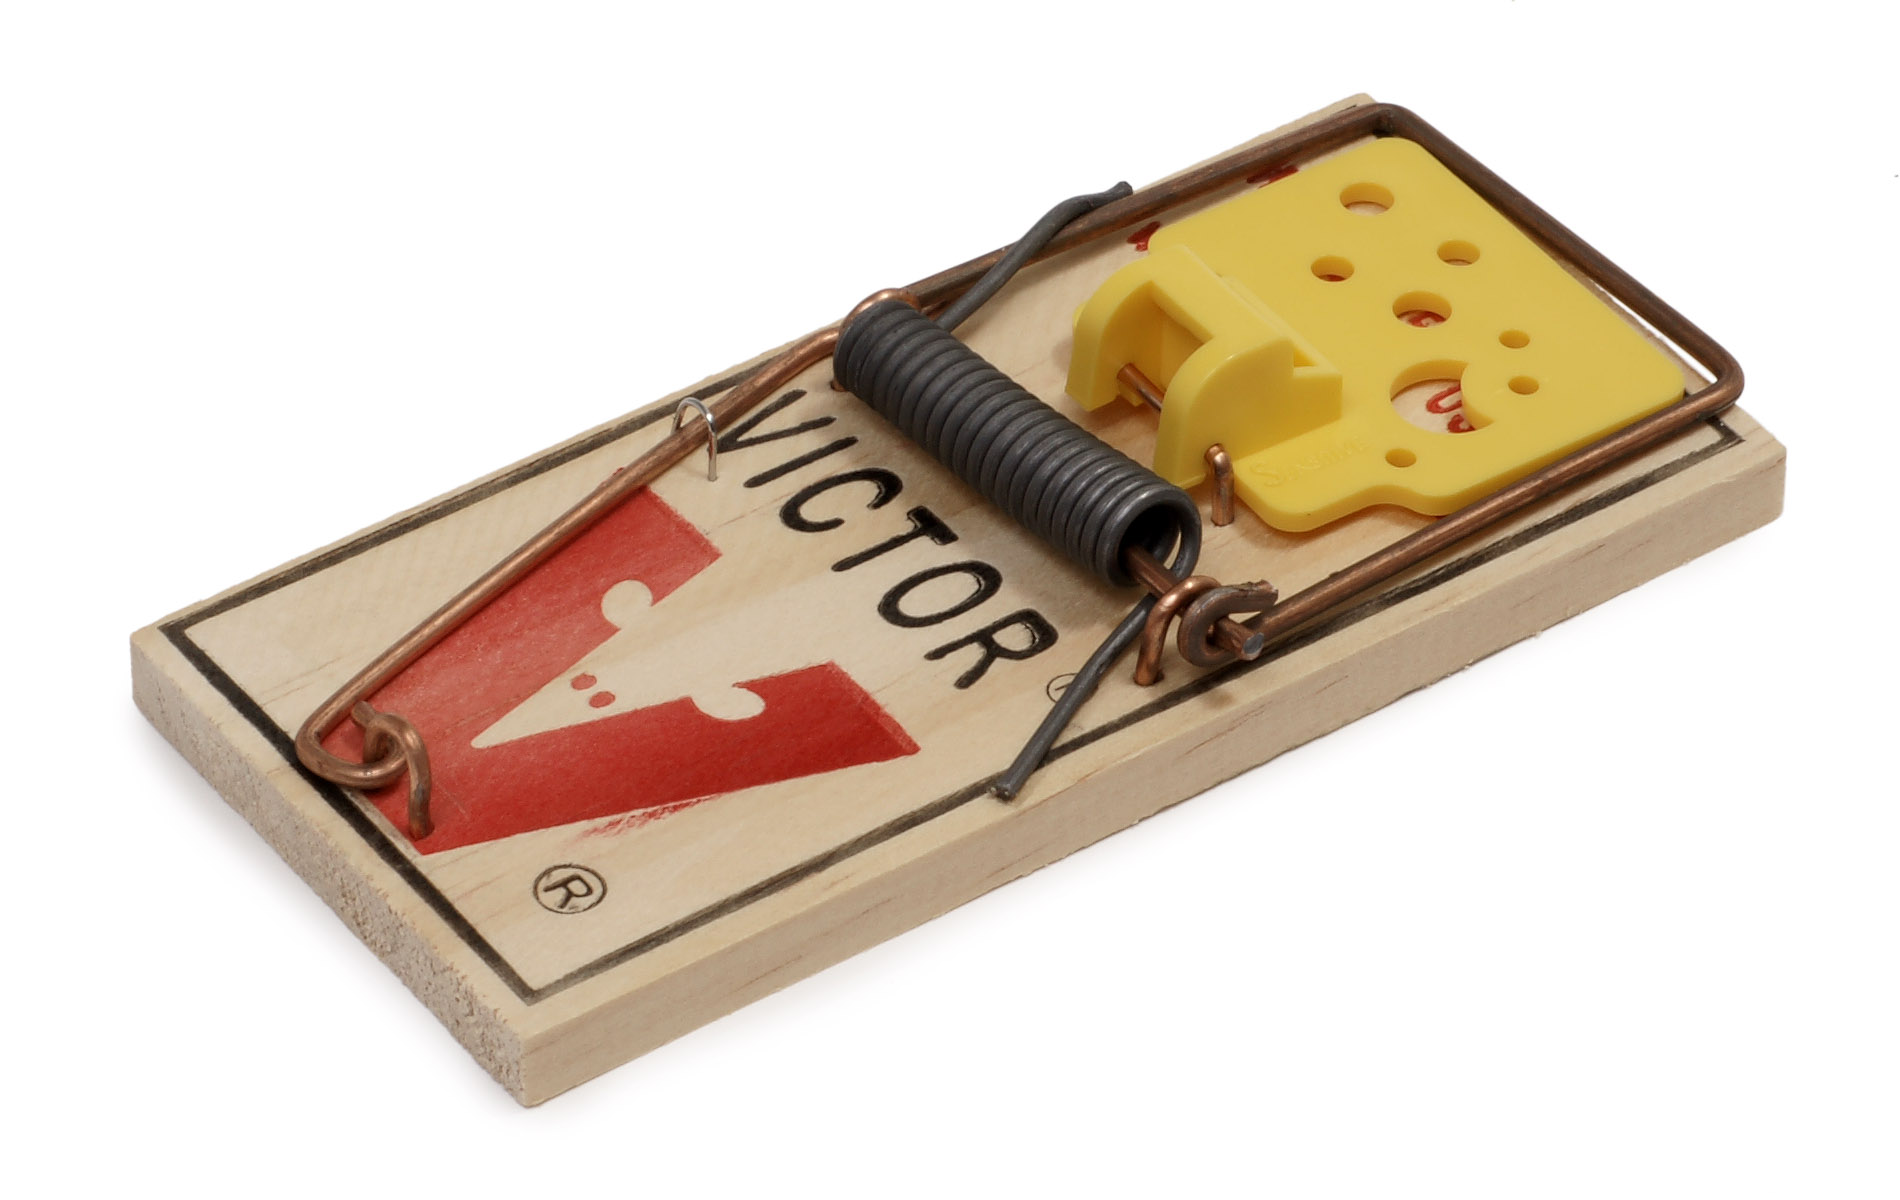 Victor-Mousetrap.jpg